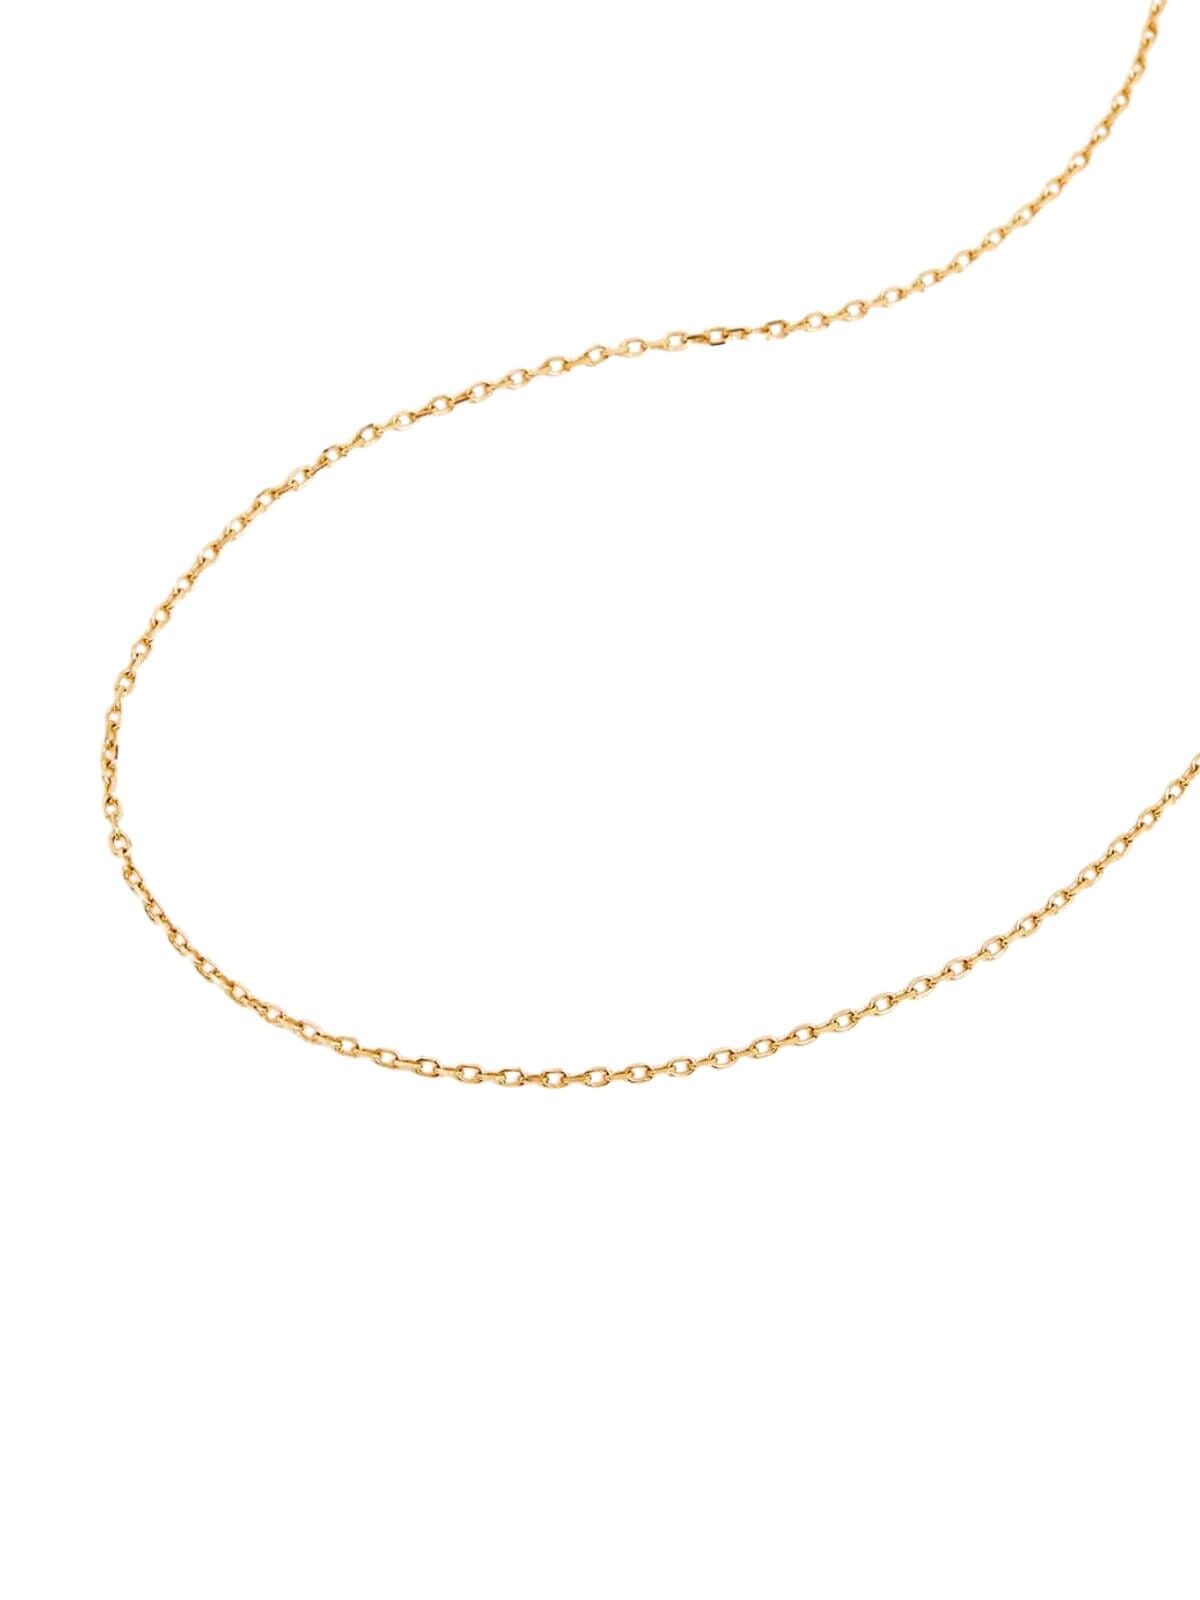 By Charlotte | 14k Gold 18" Signature Chain Necklace | Perlu